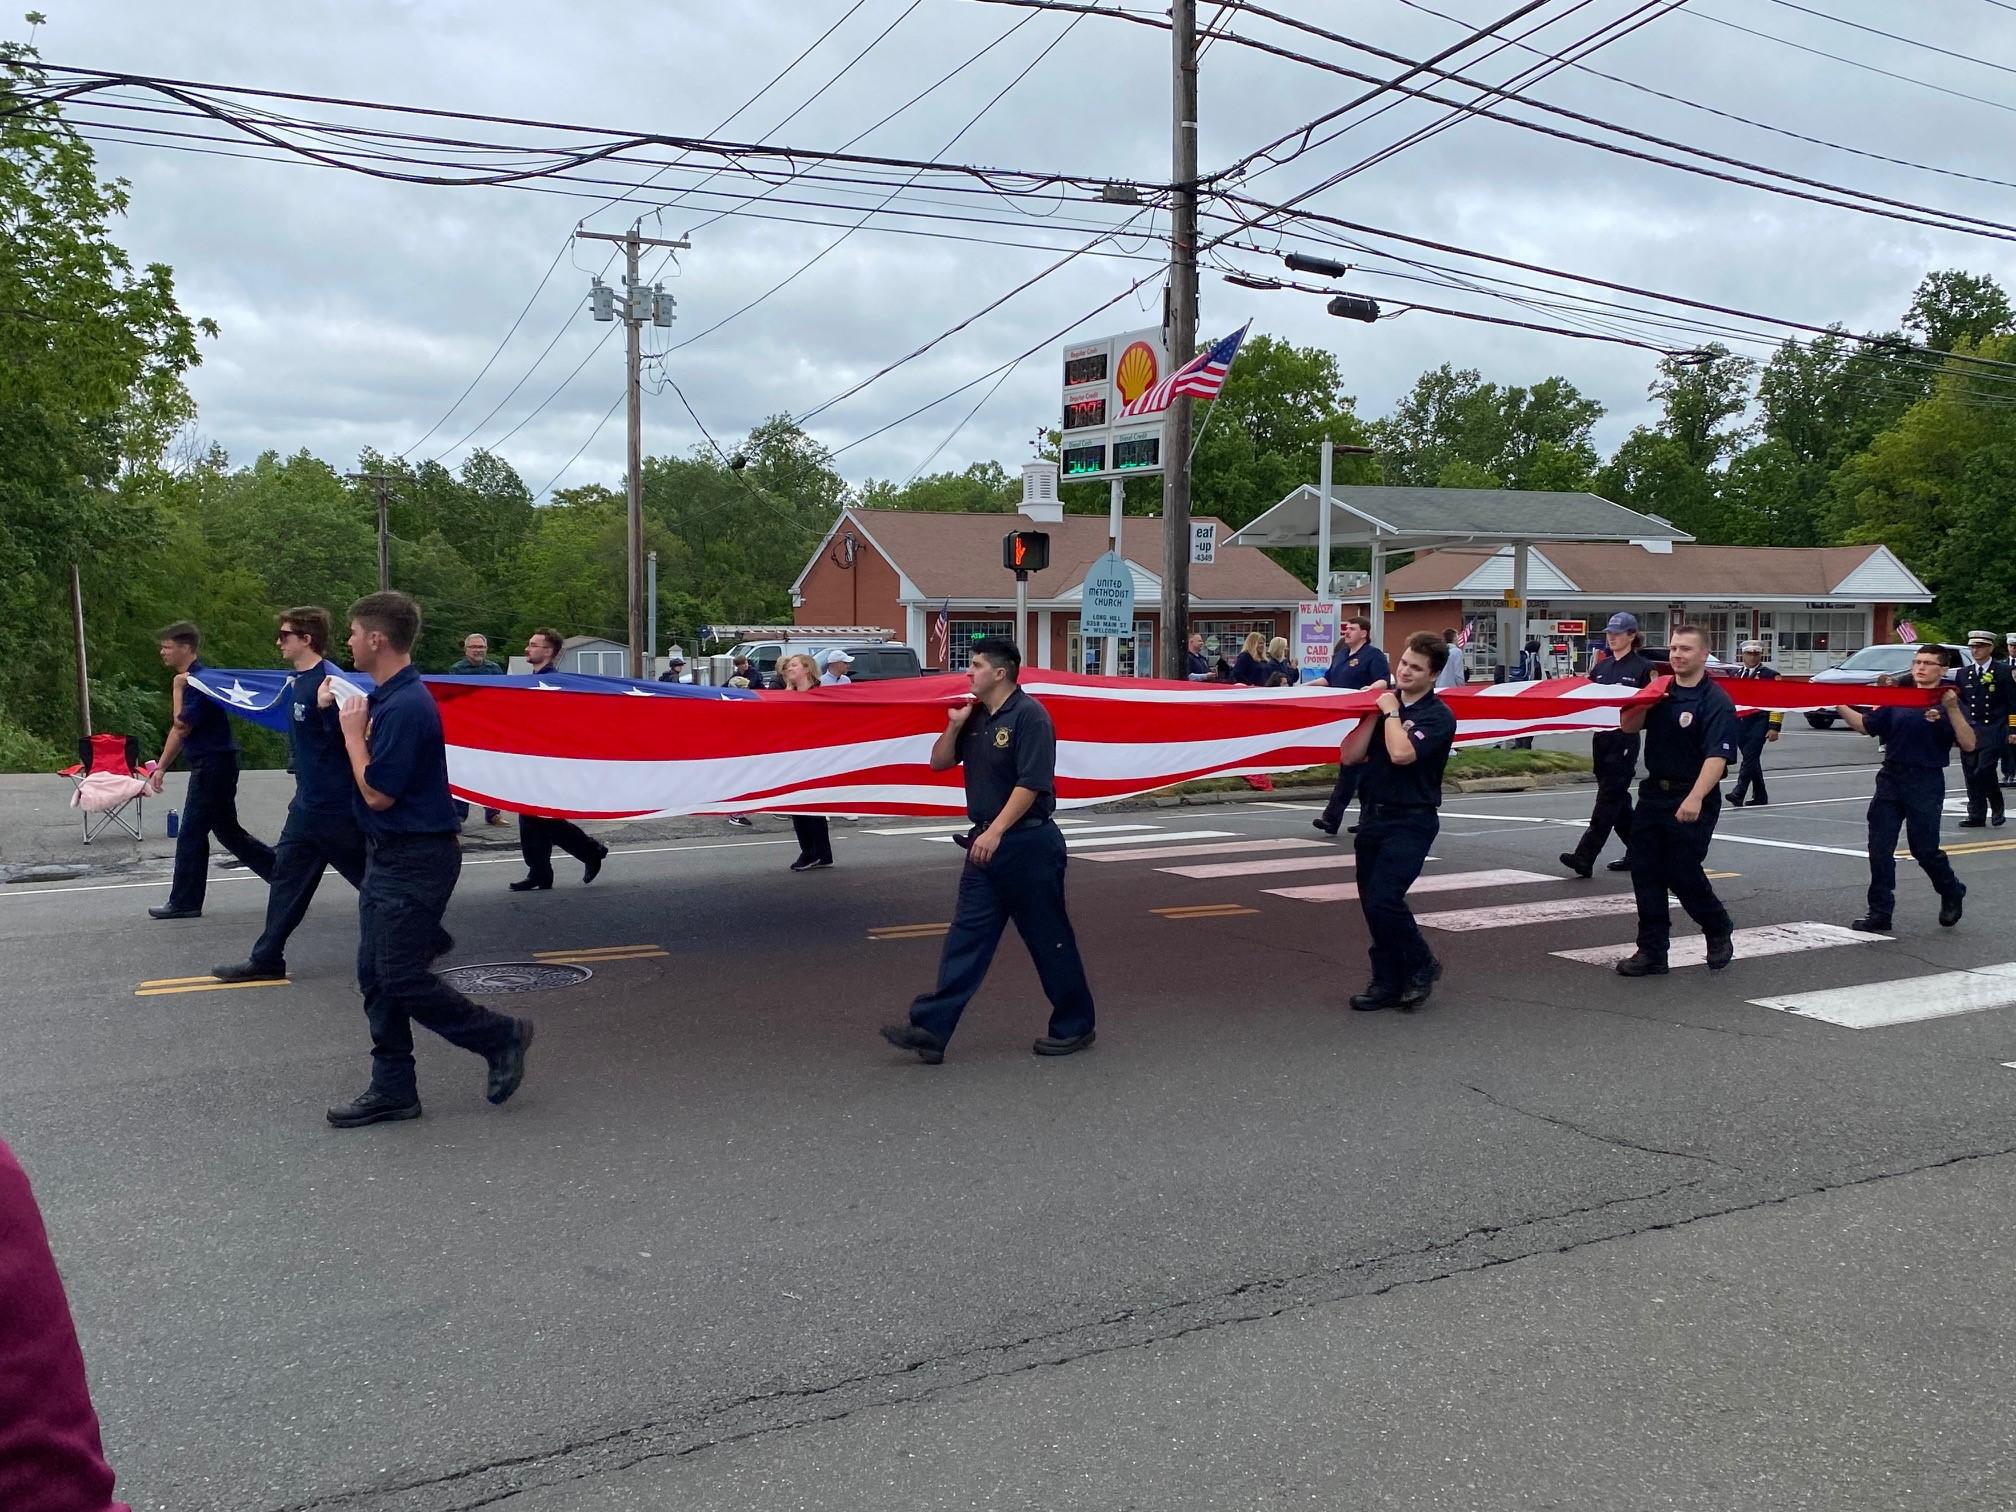 Here’s a roundup of Memorial Day events in greater Bridgeport